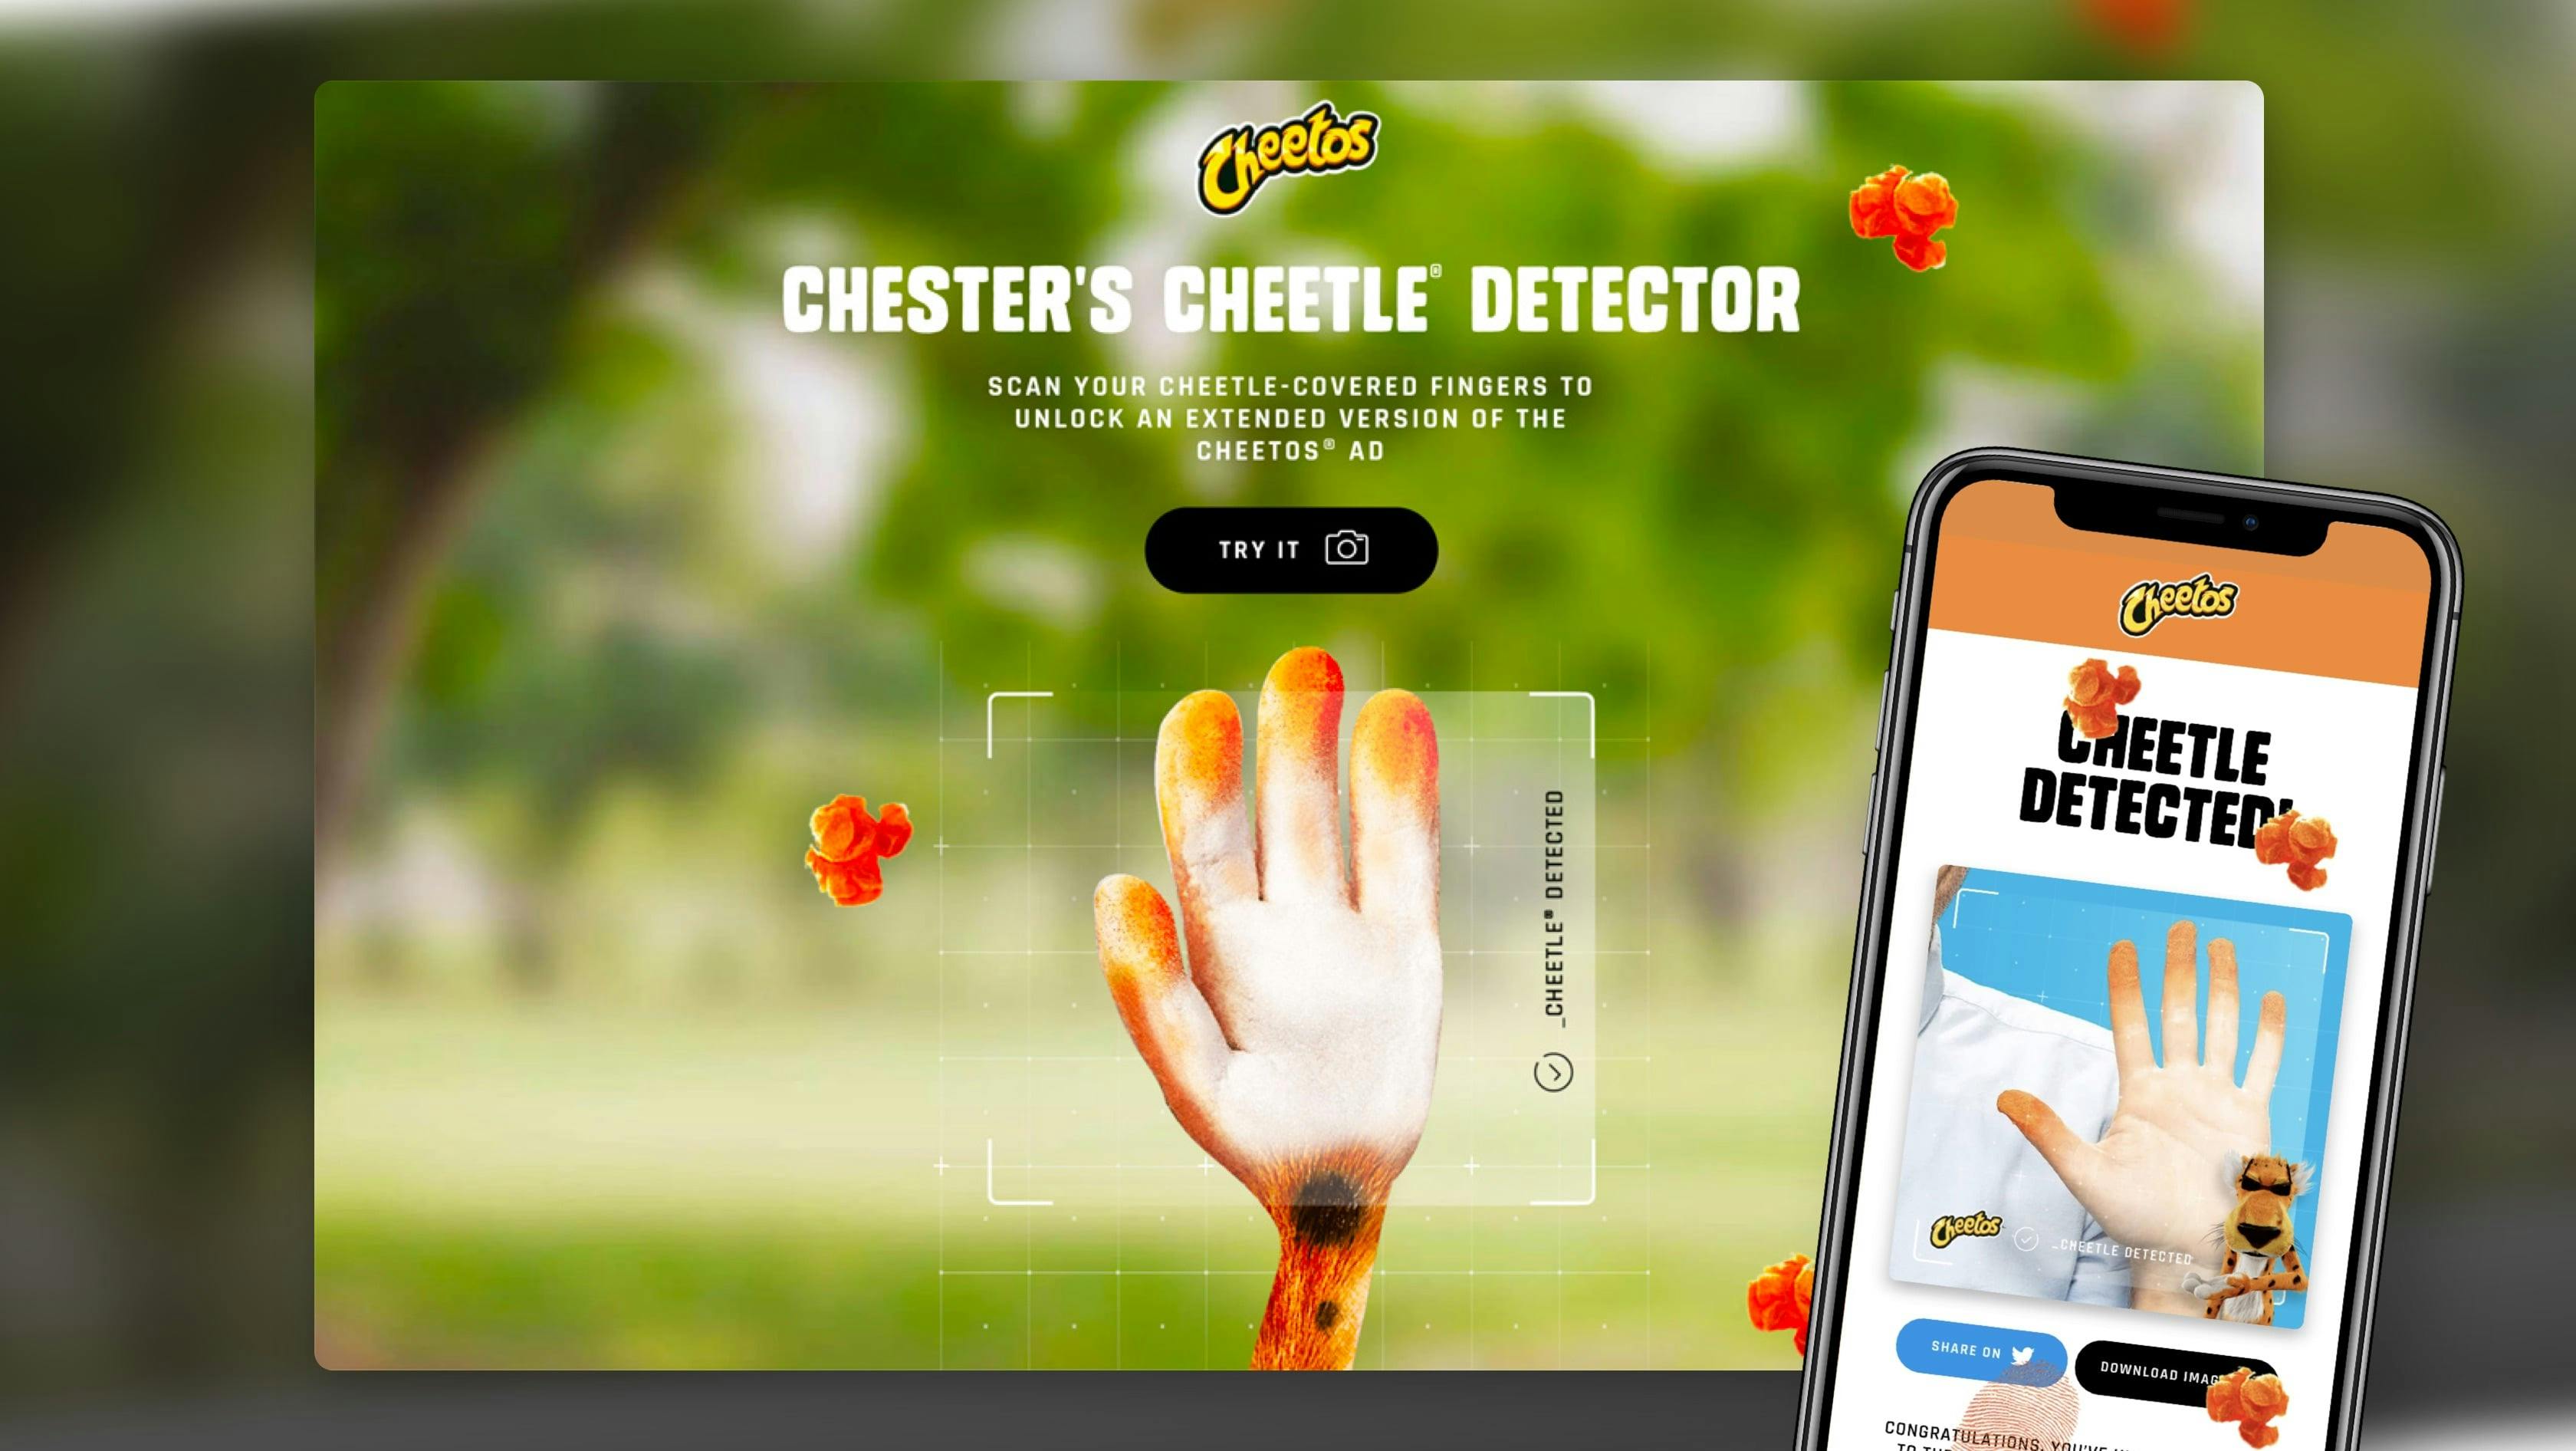 Cheetos hired me to design & develop a machine-learning based app for a Superbowl campaign — which won awards from Cannes Lion, D&AD, Webbies, and more.